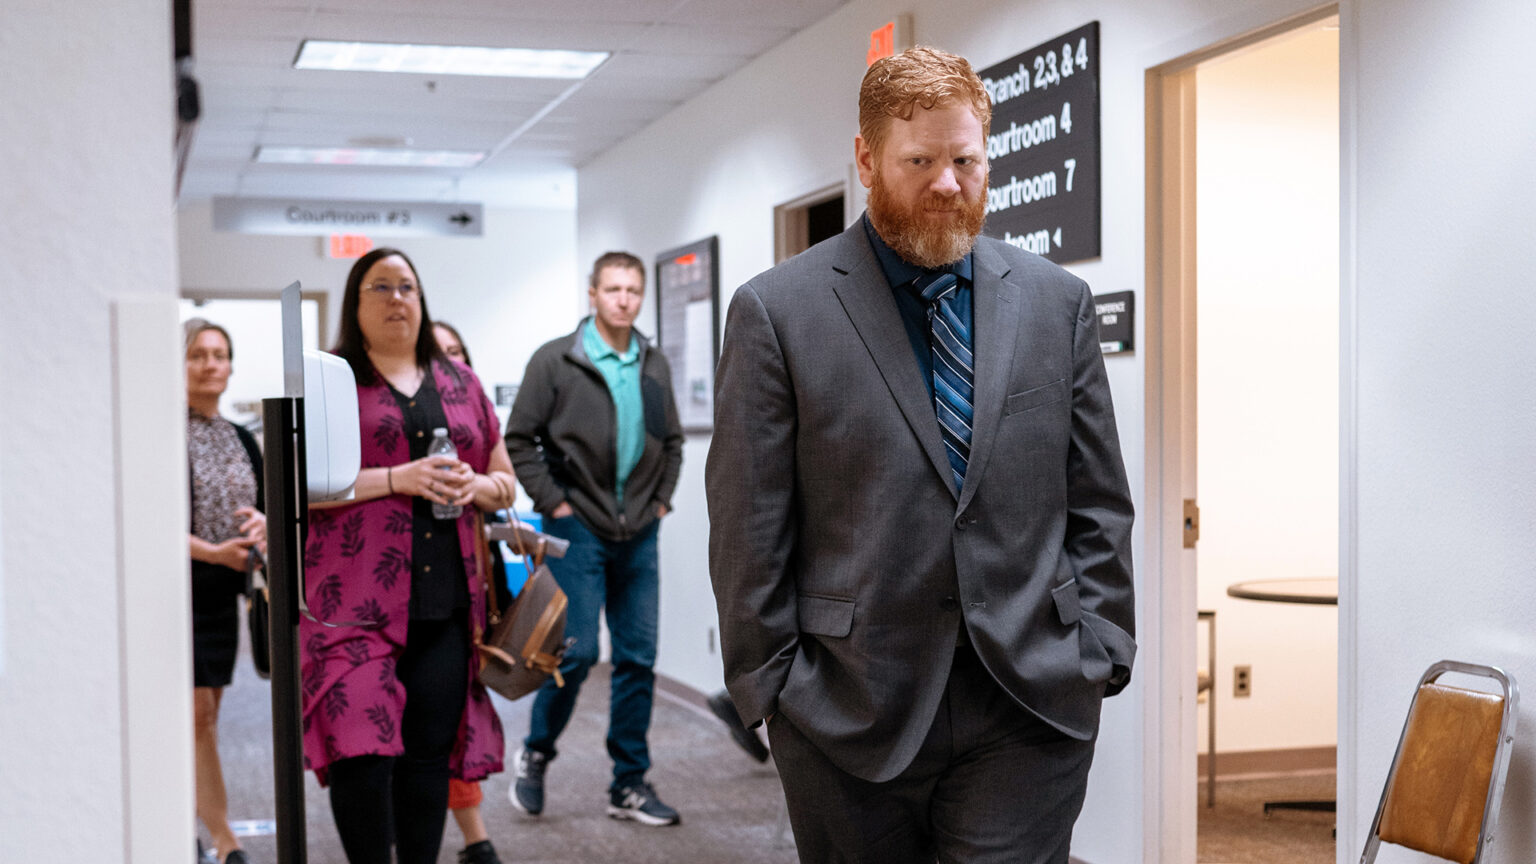 Jeremy Haney walks with his hands in his pockets with multiple people behind him in a hallway with signs noting courtroom numbers and fluorescent ceiling lights.